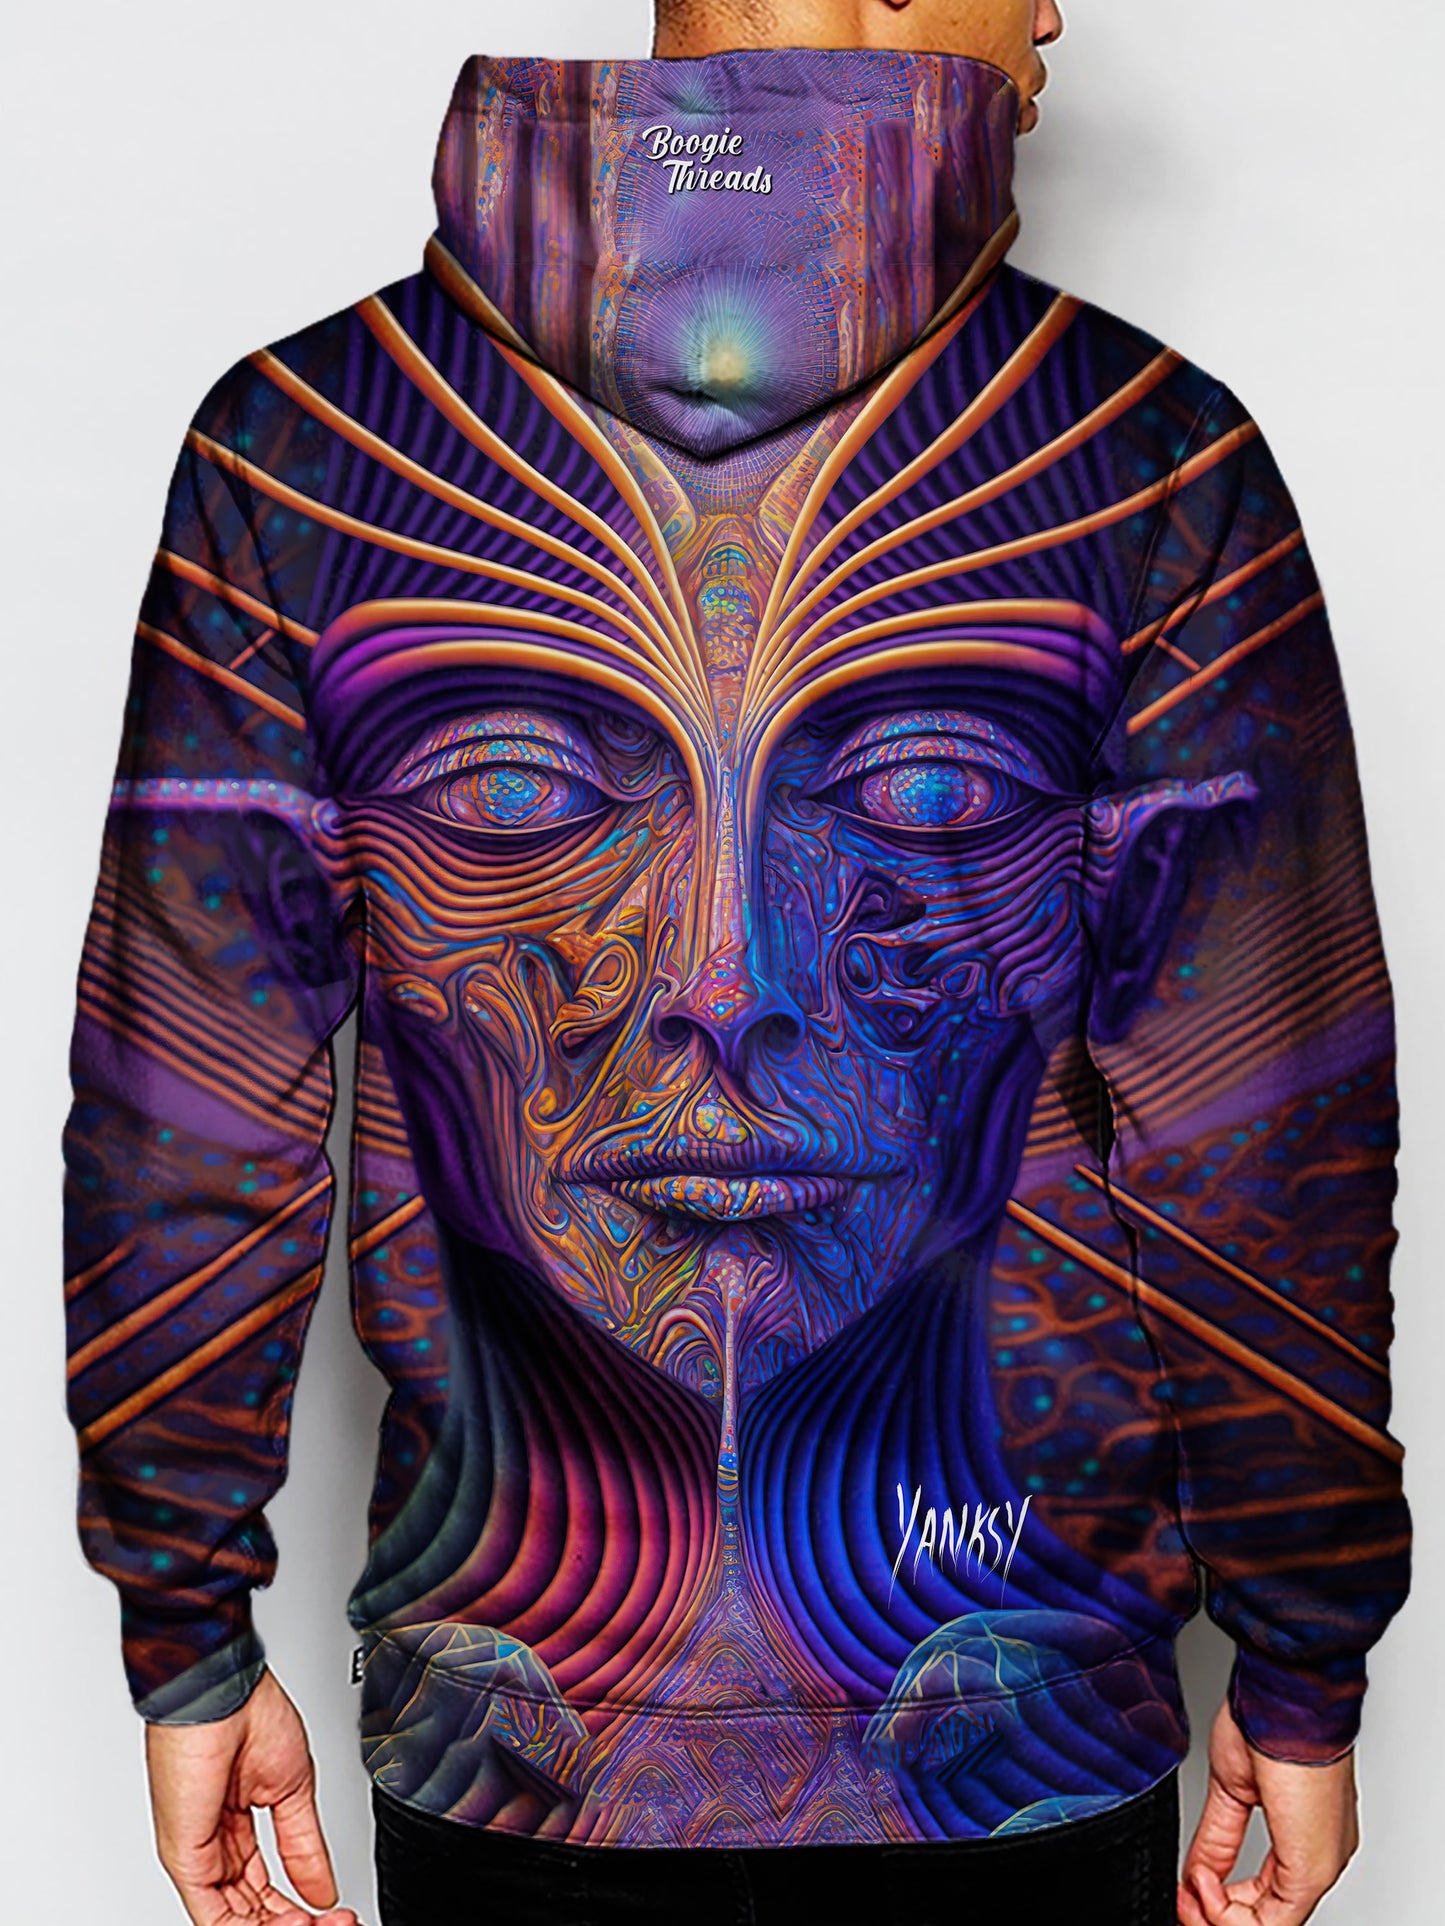 Embrace your unique style with this bright and colorful hoodie